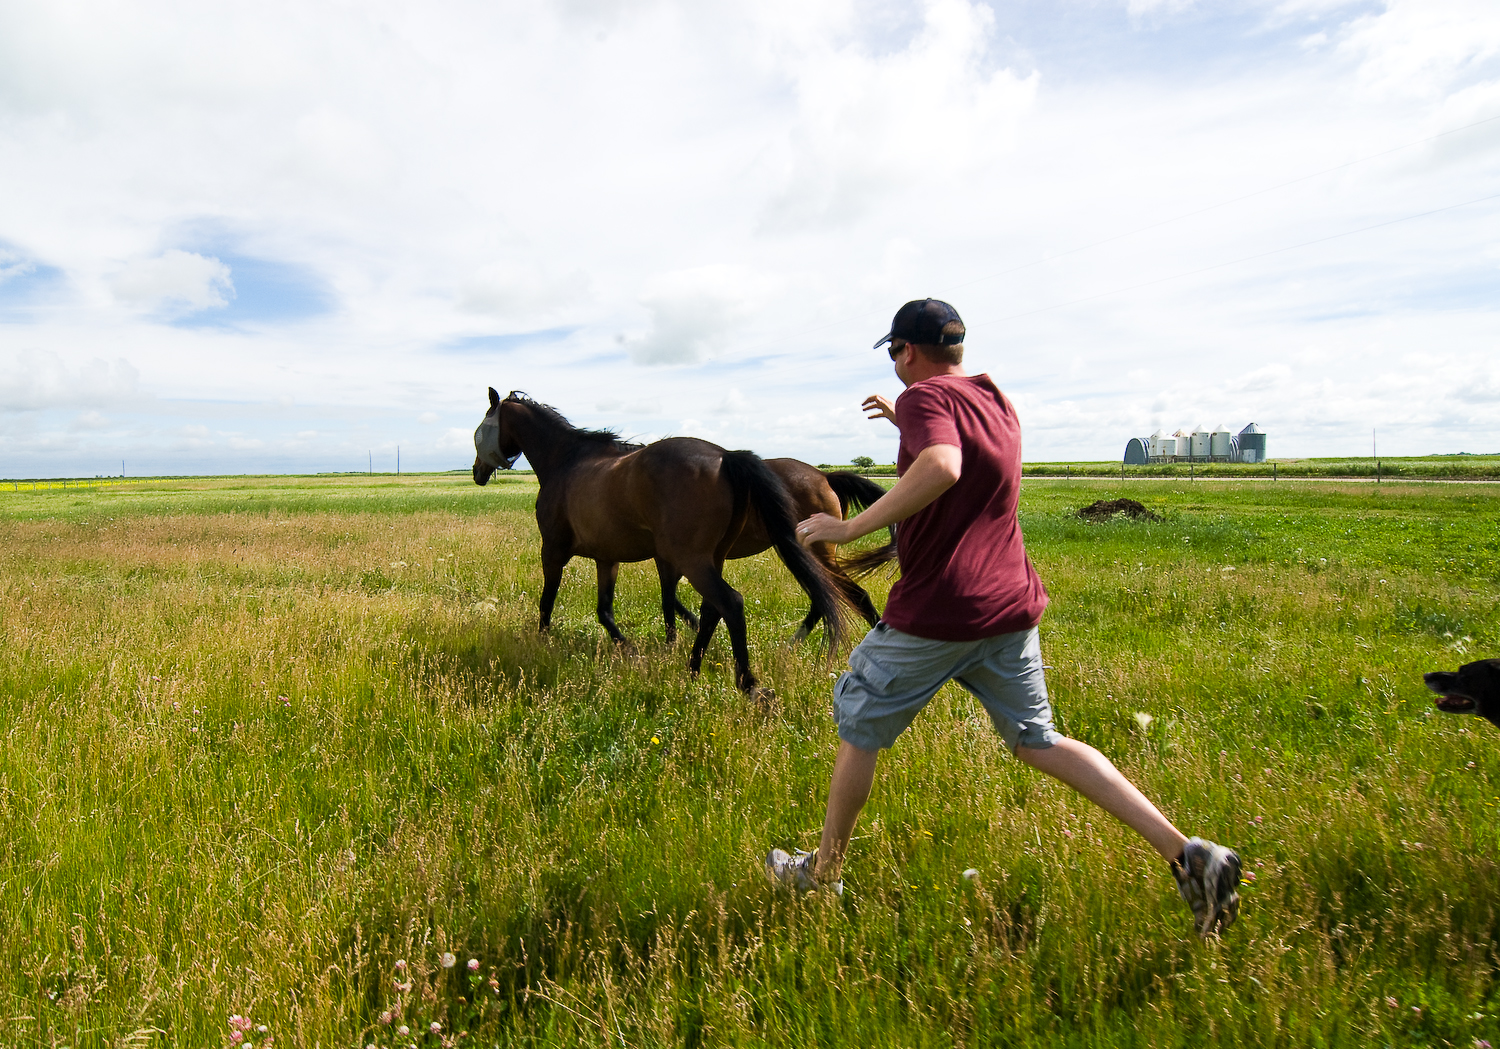 A man chasing off a horse in a field